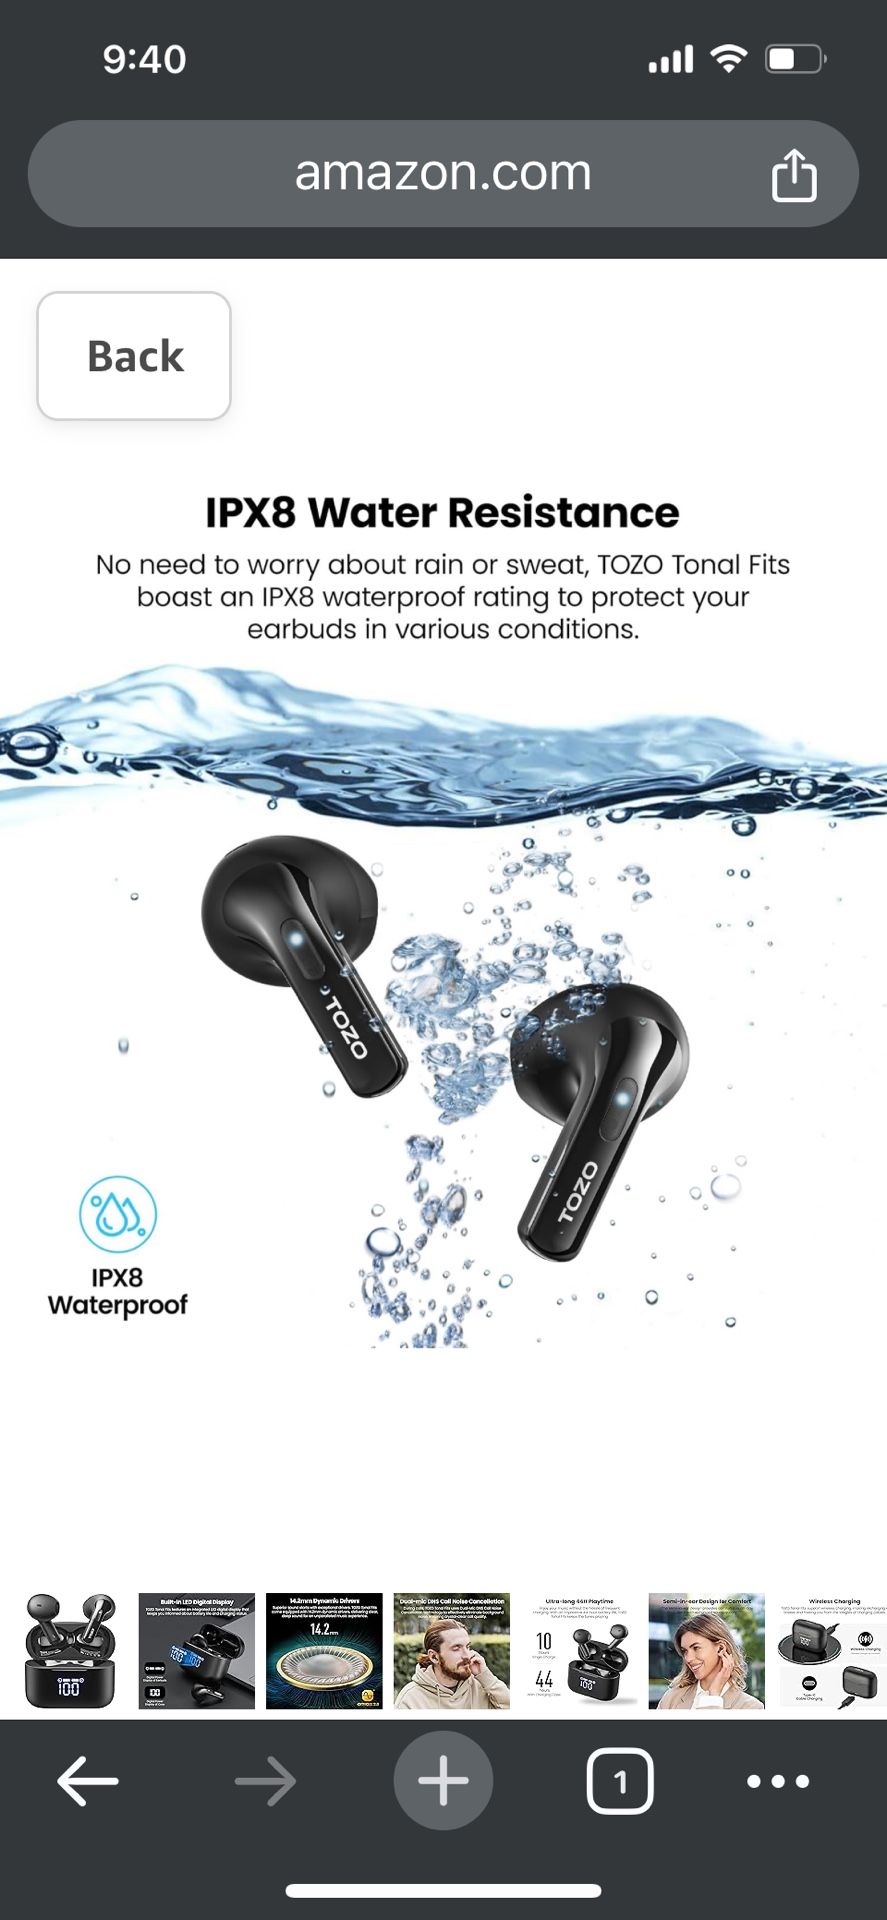 Wireless Earbuds, 5.3 Bluetooth Headphone, Sem in Ear with Dual Mic Noise Cancelling, IPX8 Waterproof, 44H Playback Stere Sound with Power Display Wir